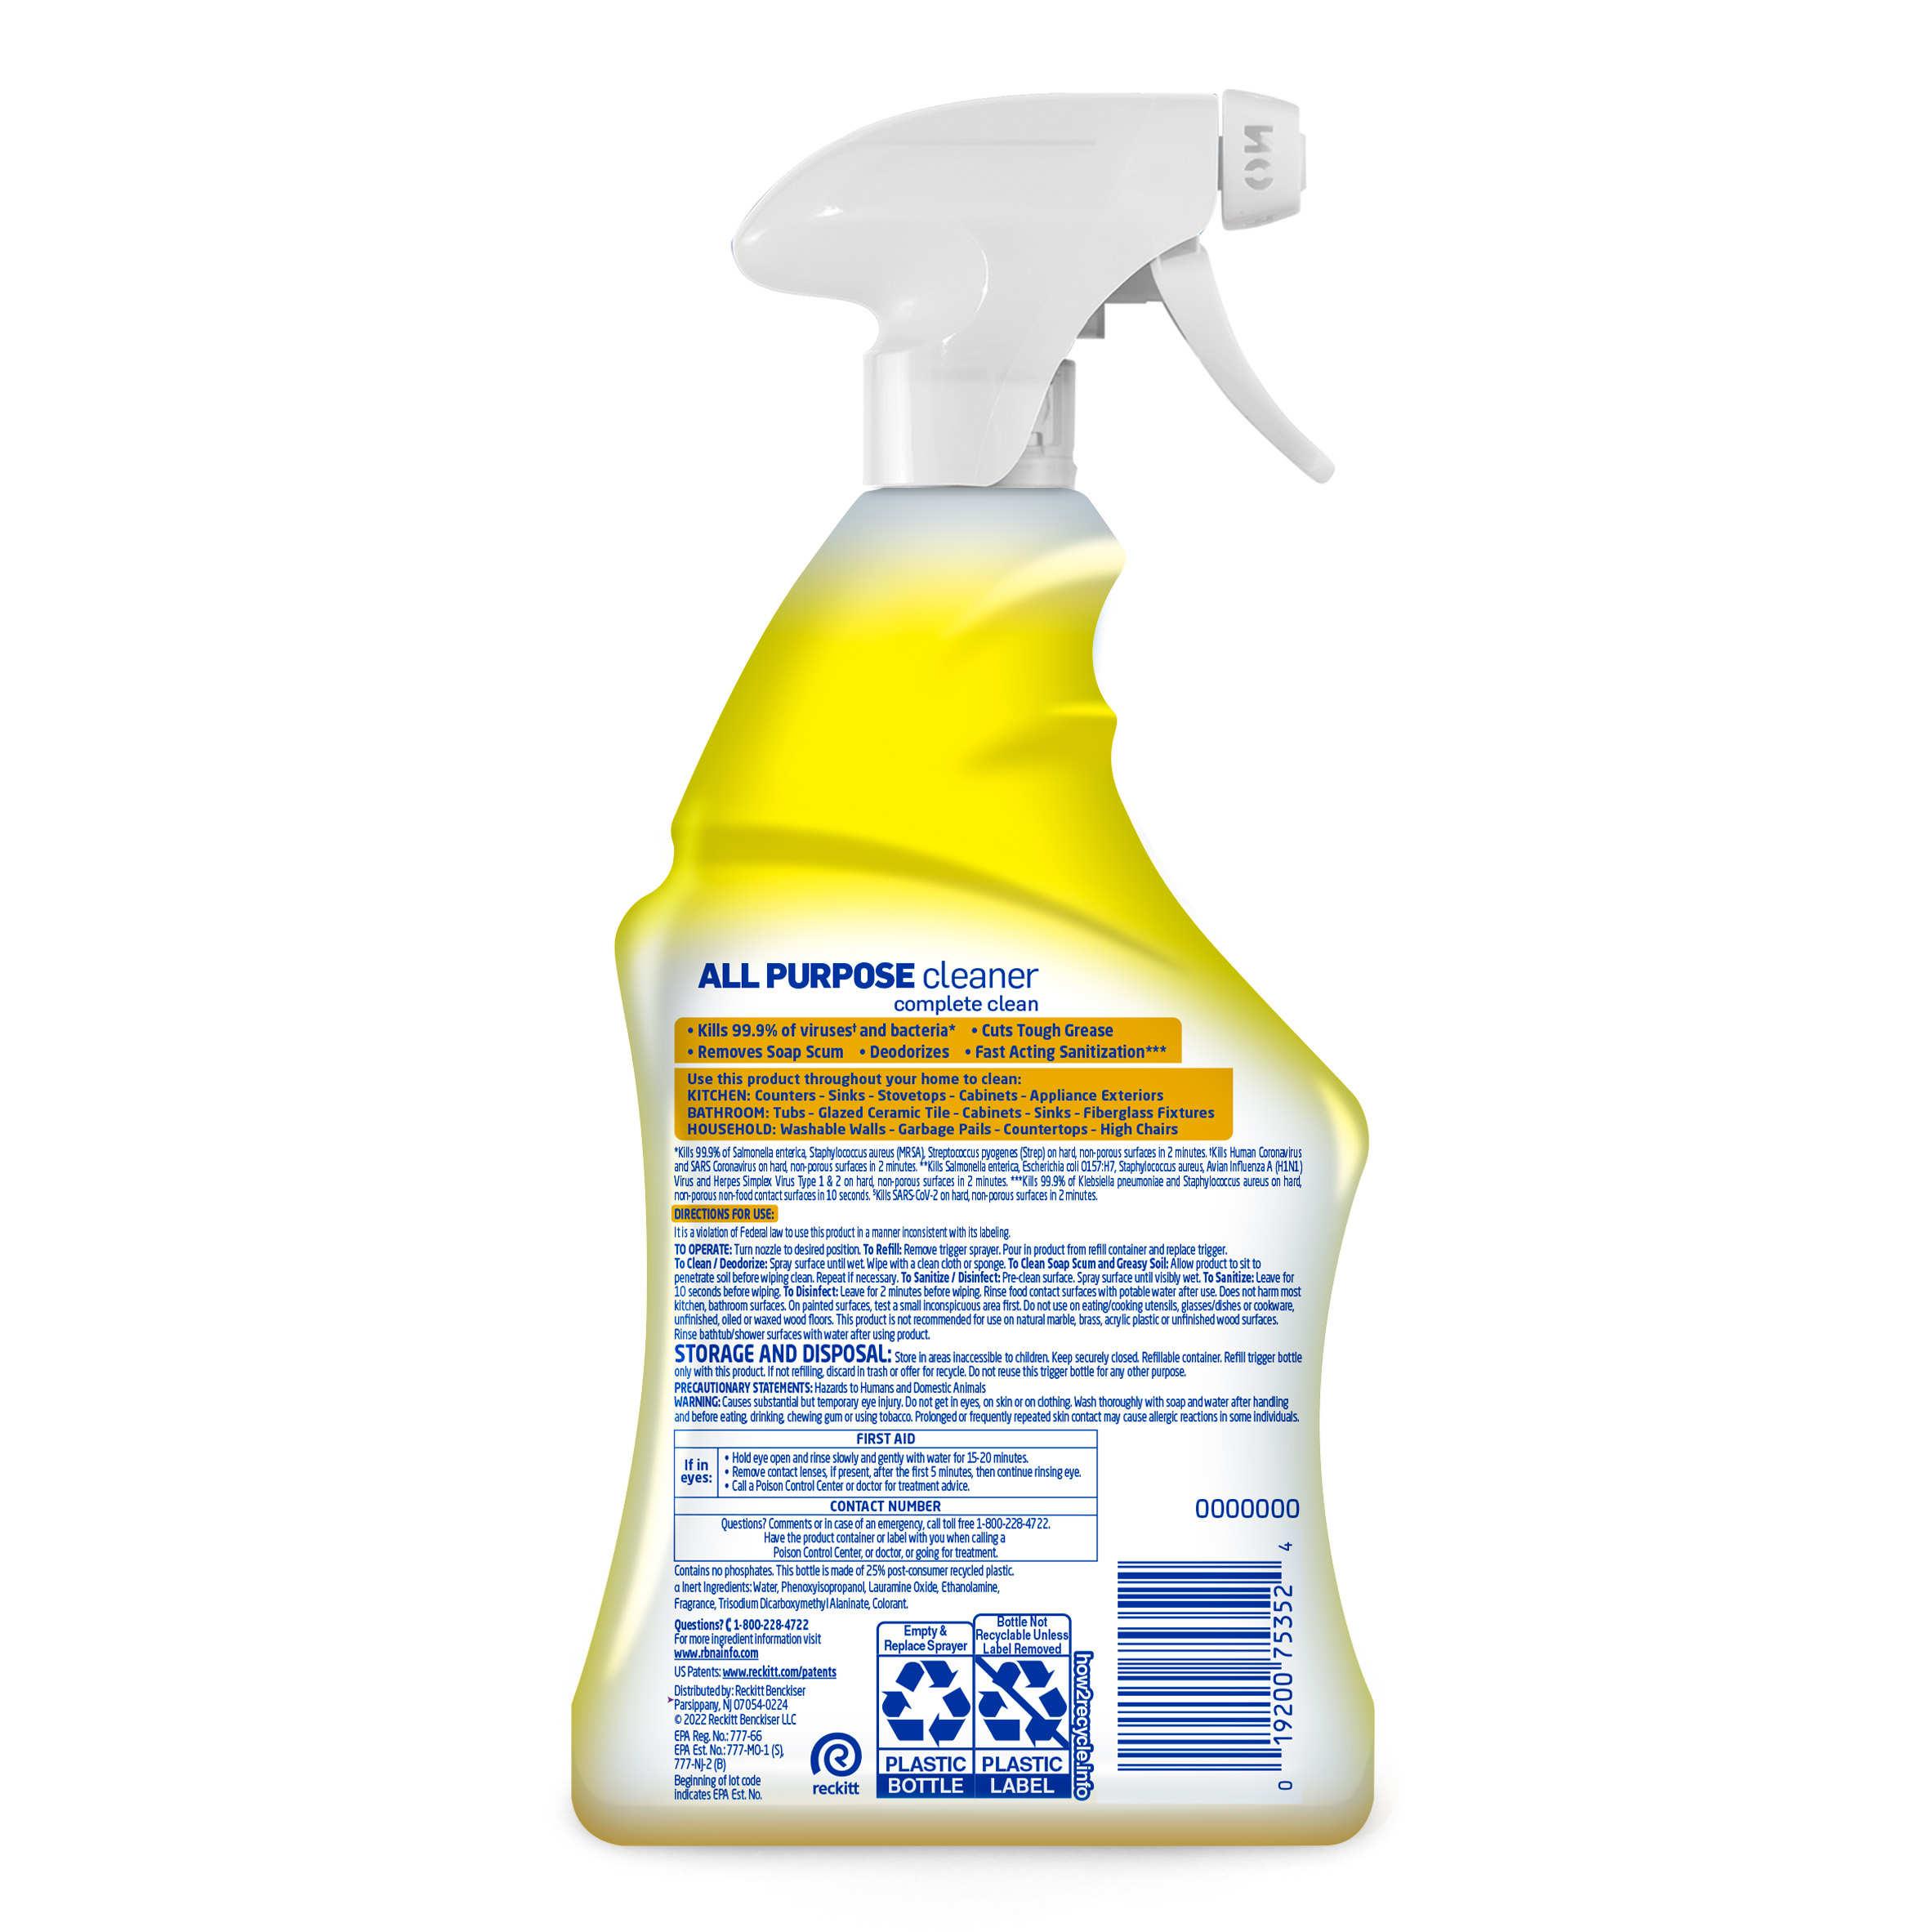 Lysol All-Purpose Cleaner, Sanitizing and Disinfecting Spray, To Clean and Deodorize, Lemon Breeze Scent, 32oz - image 2 of 6